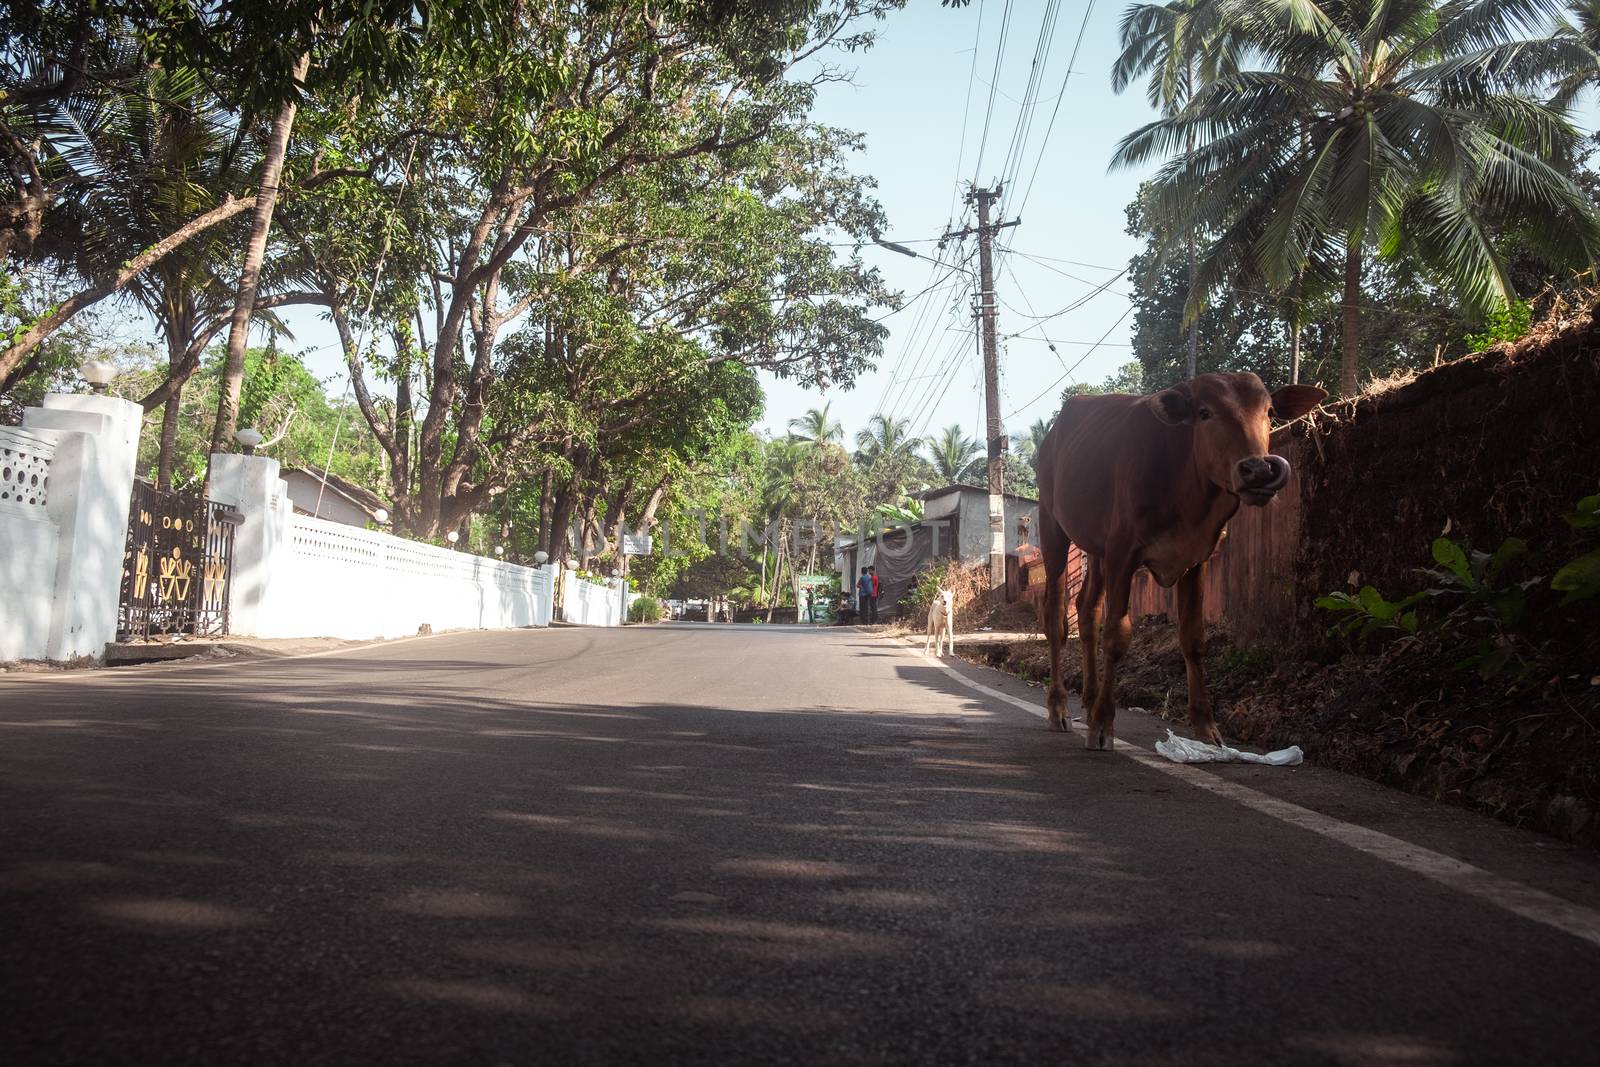 Cow Walking On Road by snep_photo